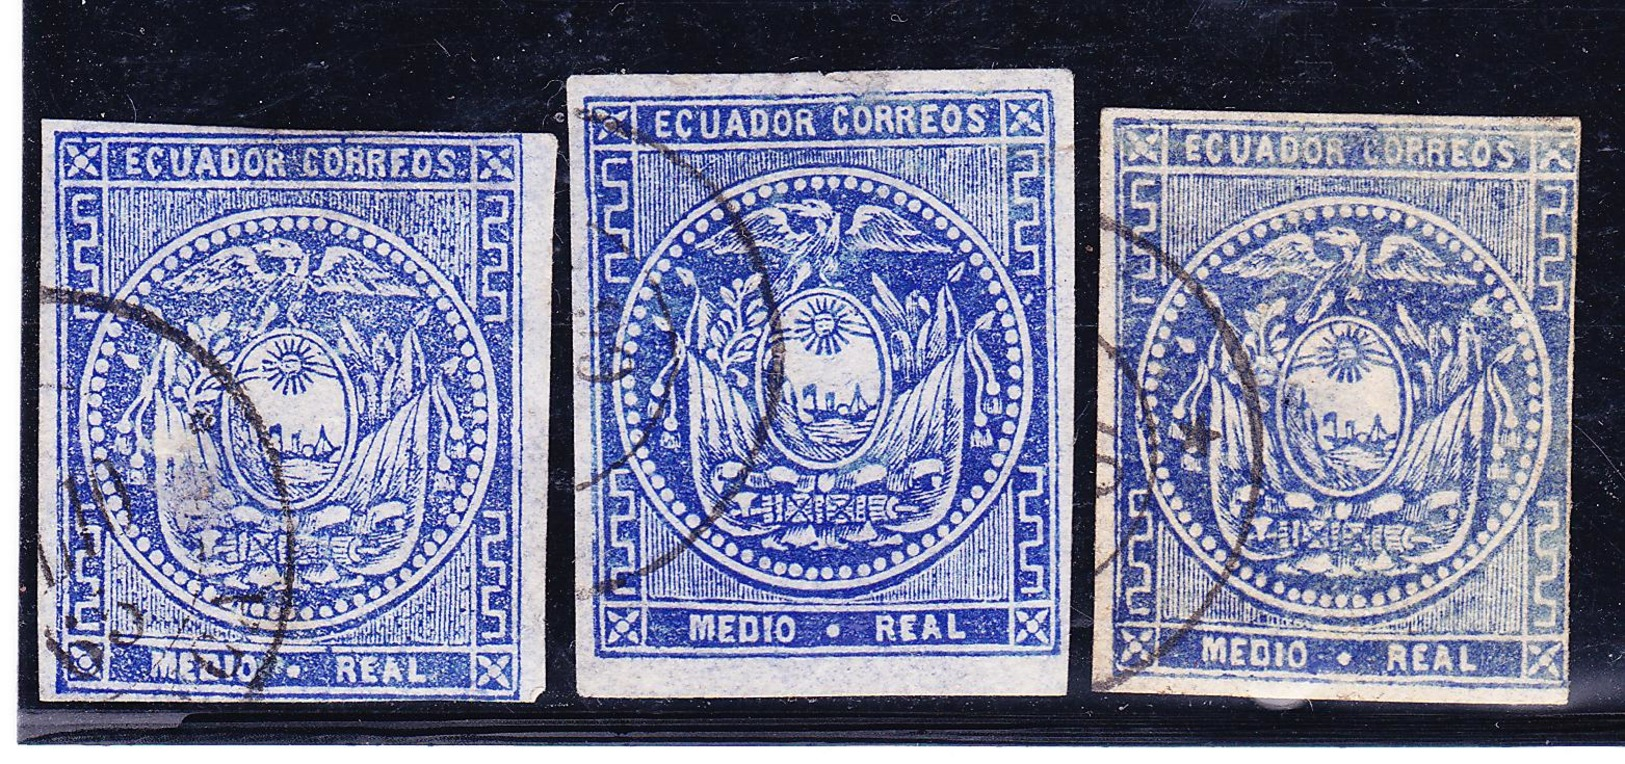 ECUADOR 1865-1867 COAT OF ARMS HALF REAL BLUE FIRST EMISSION CANCELLED OF 3 FIRST YEARS 65'-66'-67 SC# 2 - Ecuador